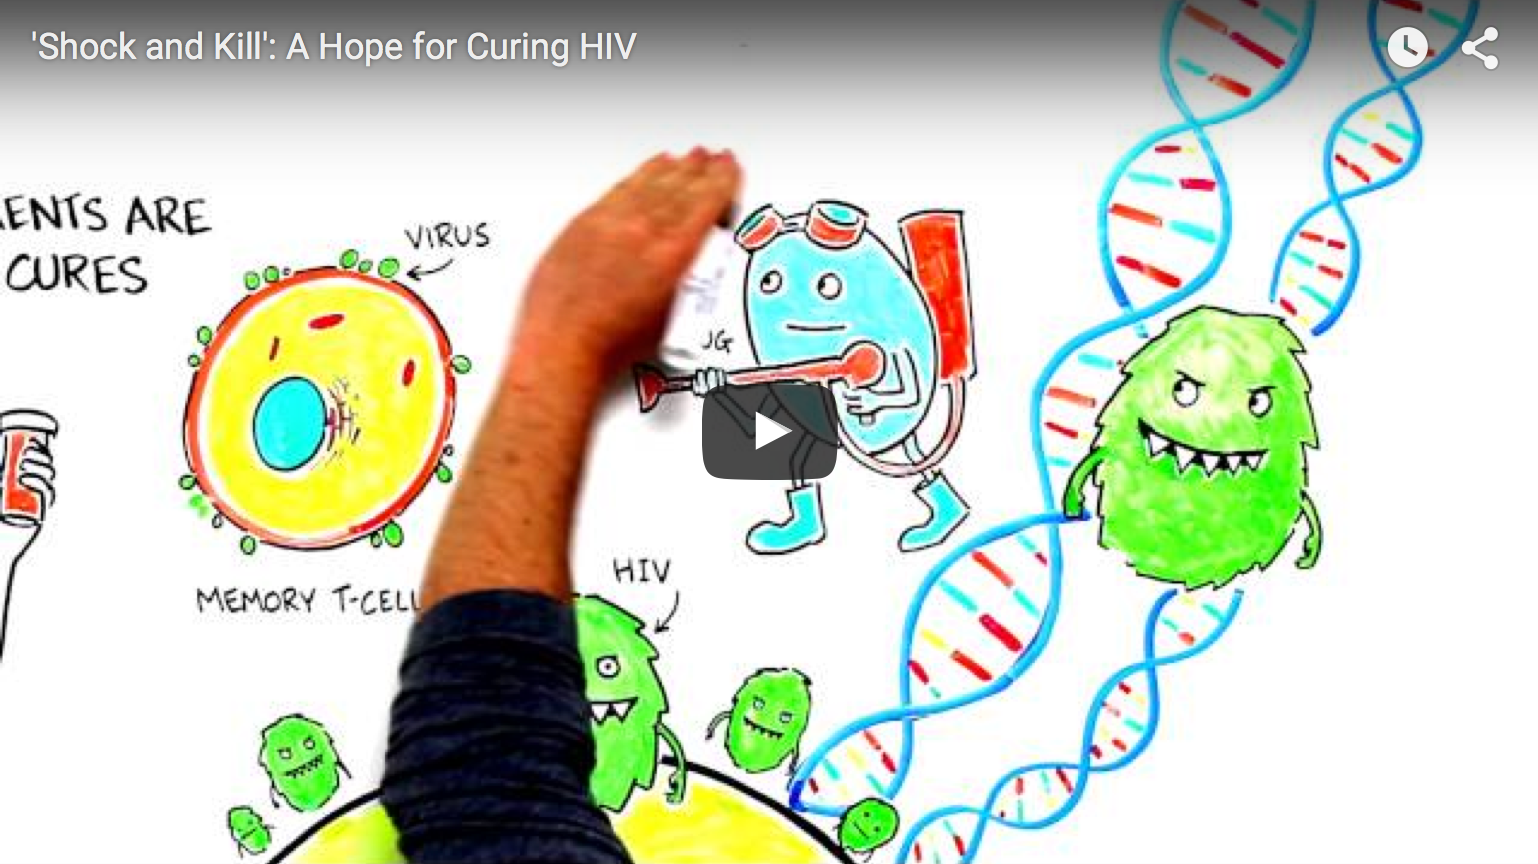 screenshot from the video 'Shock and Kill: A Hope for Curing HIV'